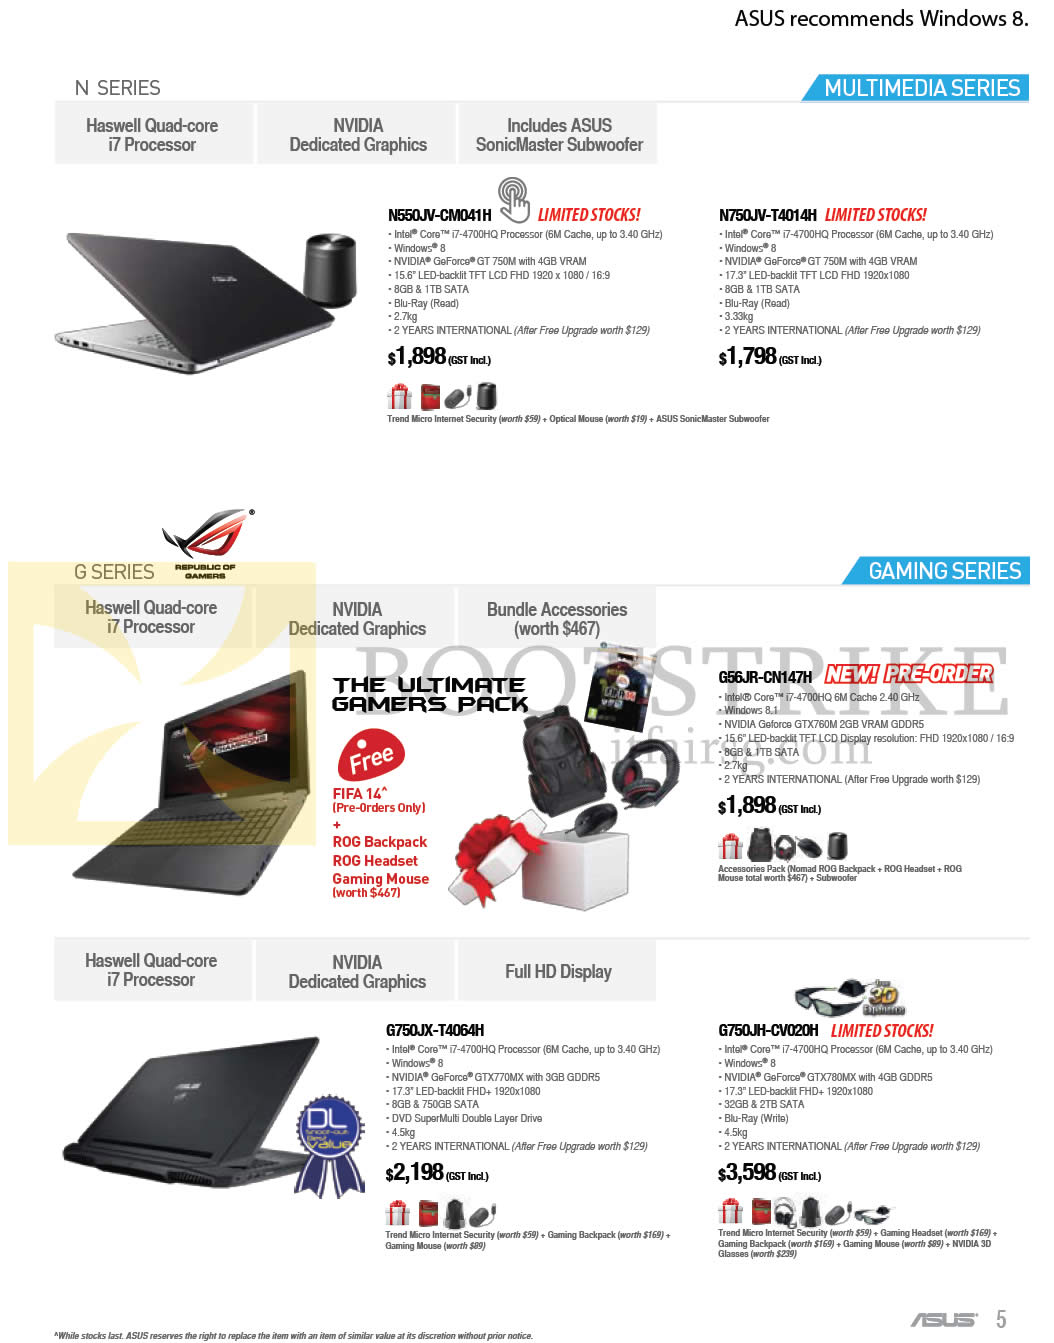 IT SHOW 2014 price list image brochure of ASUS Notebooks N550JV-CM041H, N750JV-T4014H, G56JR-CN147H, G750JX-T4064H, G750JH-CV020H